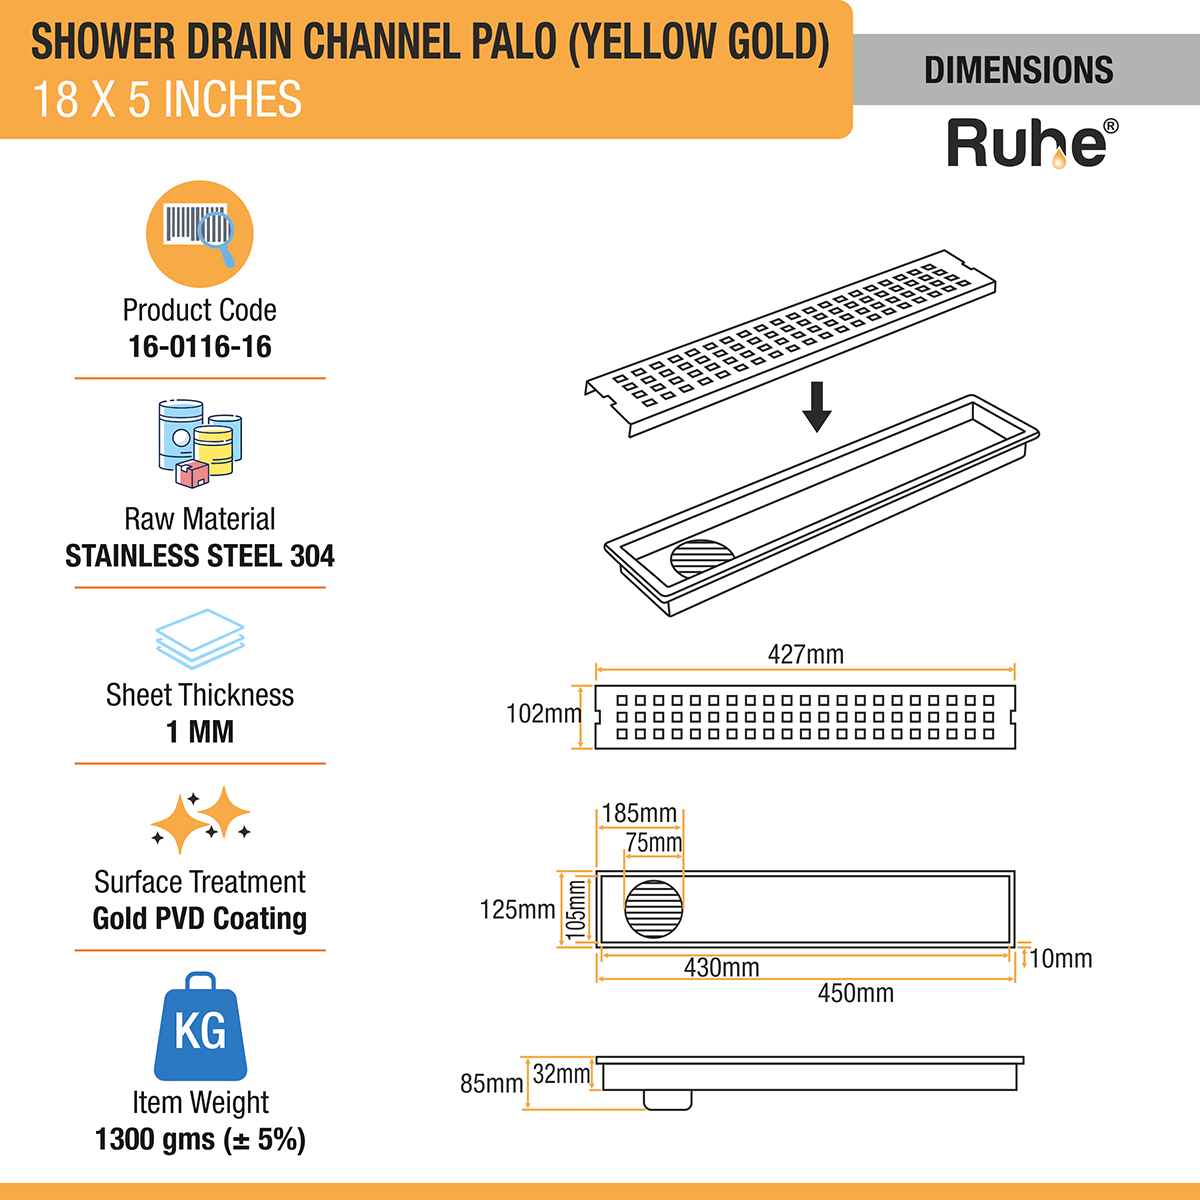 Palo Shower Drain Channel (18 x 5 Inches) YELLOW GOLD dimensions and size